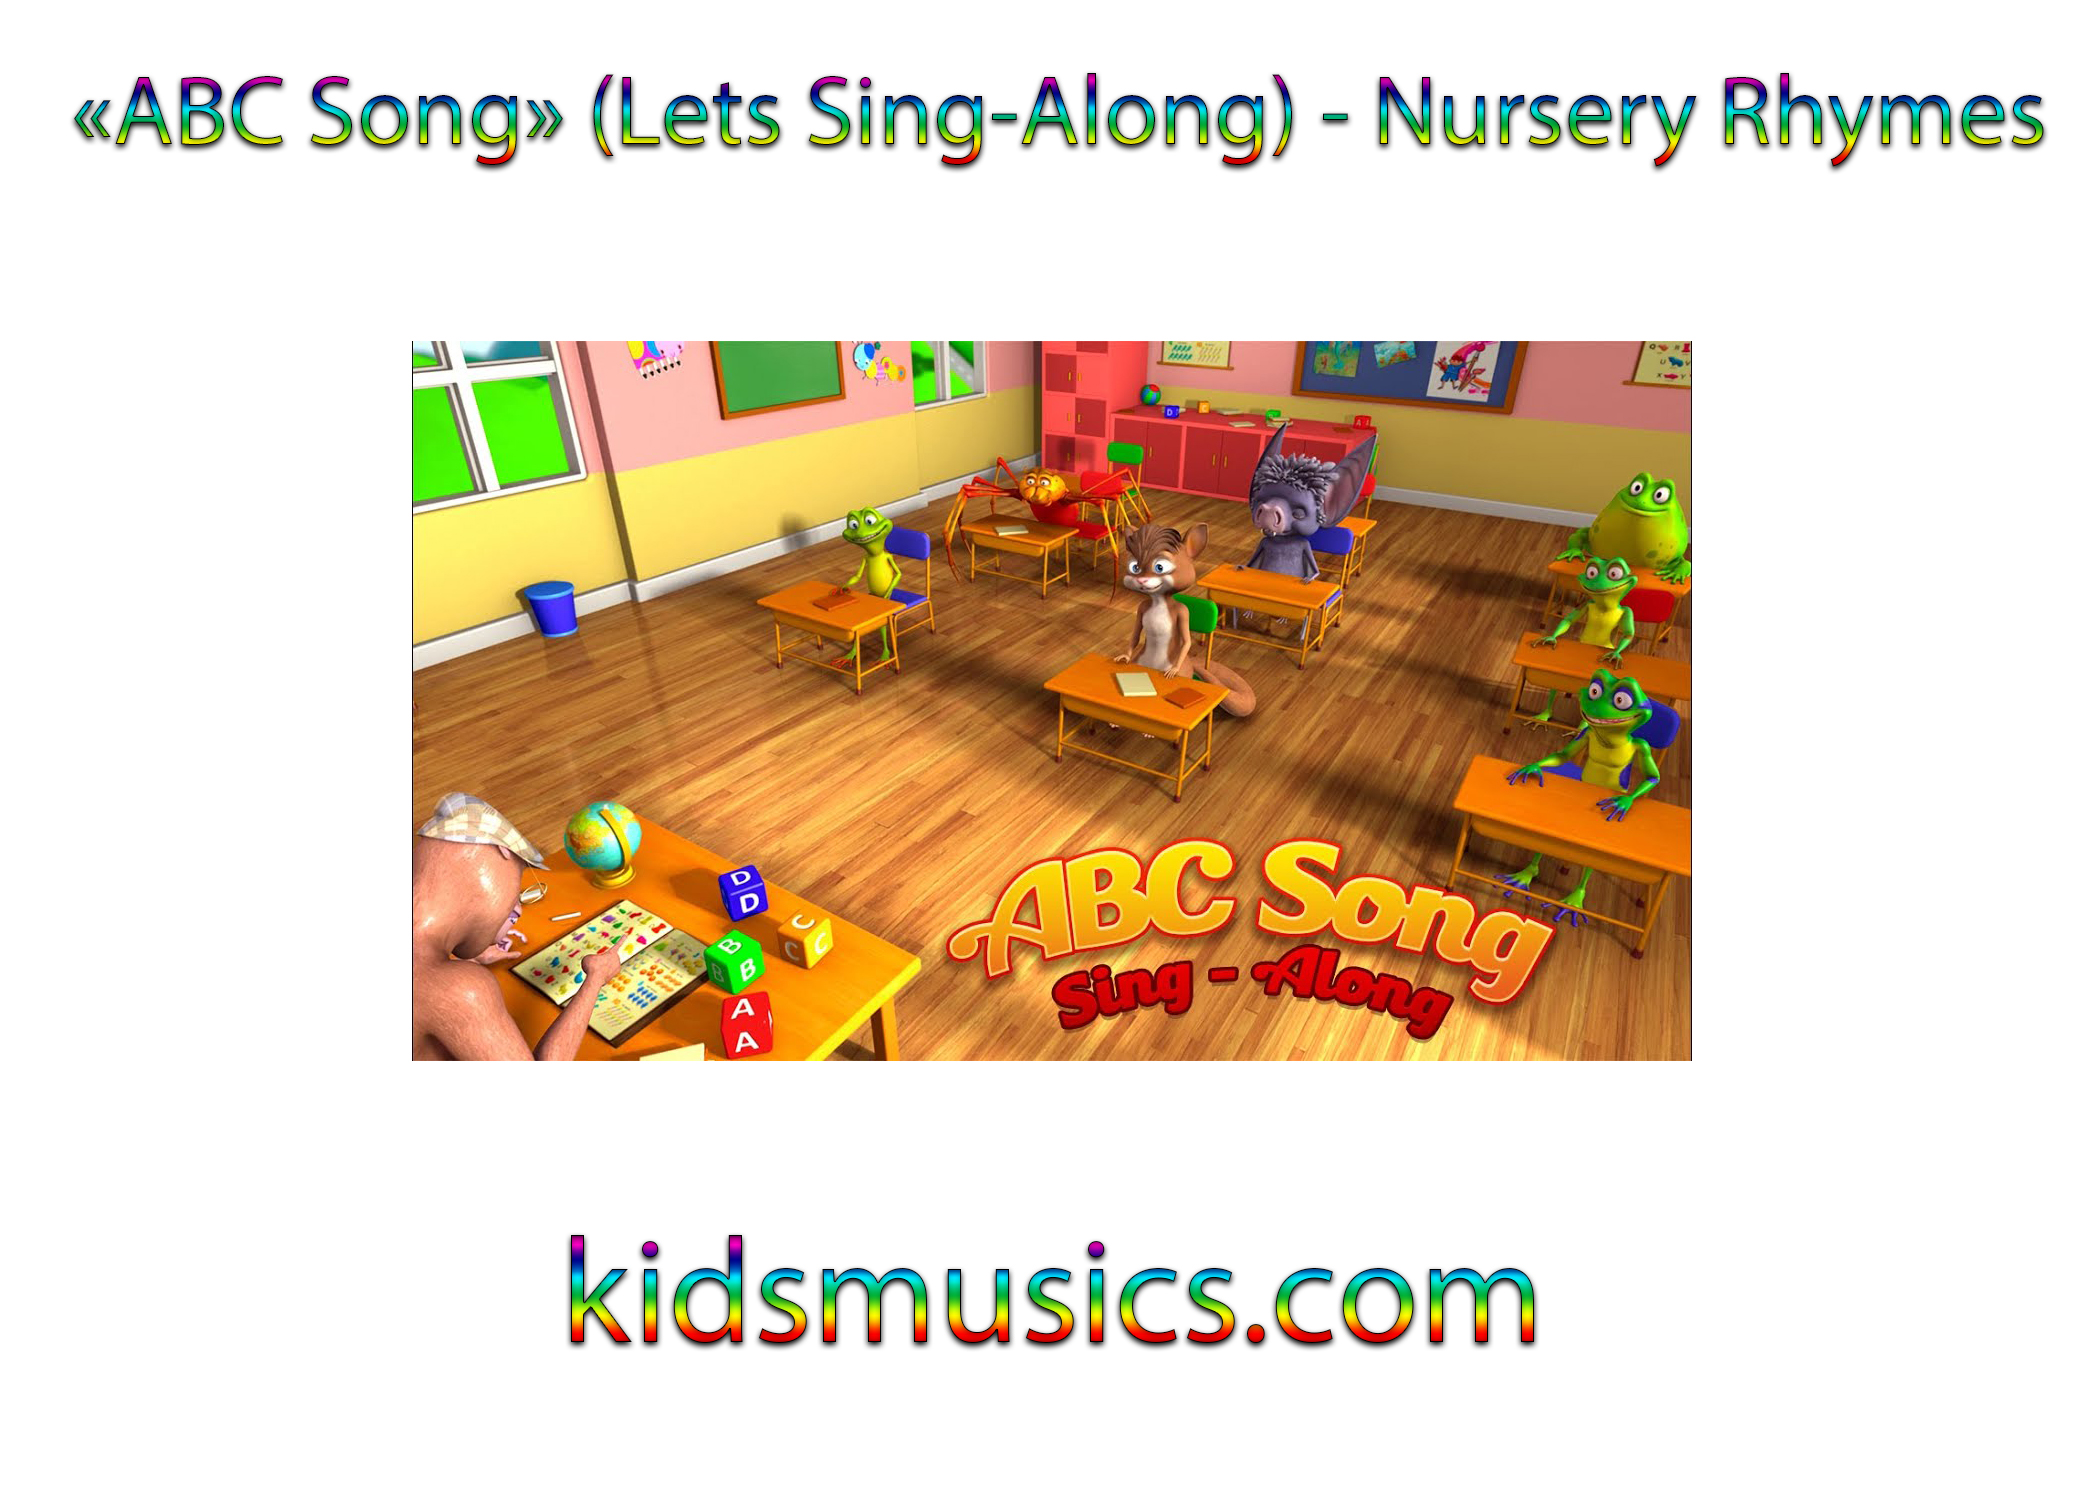 «ABC Song» (Lets Sing-Along) - Nursery Rhymes